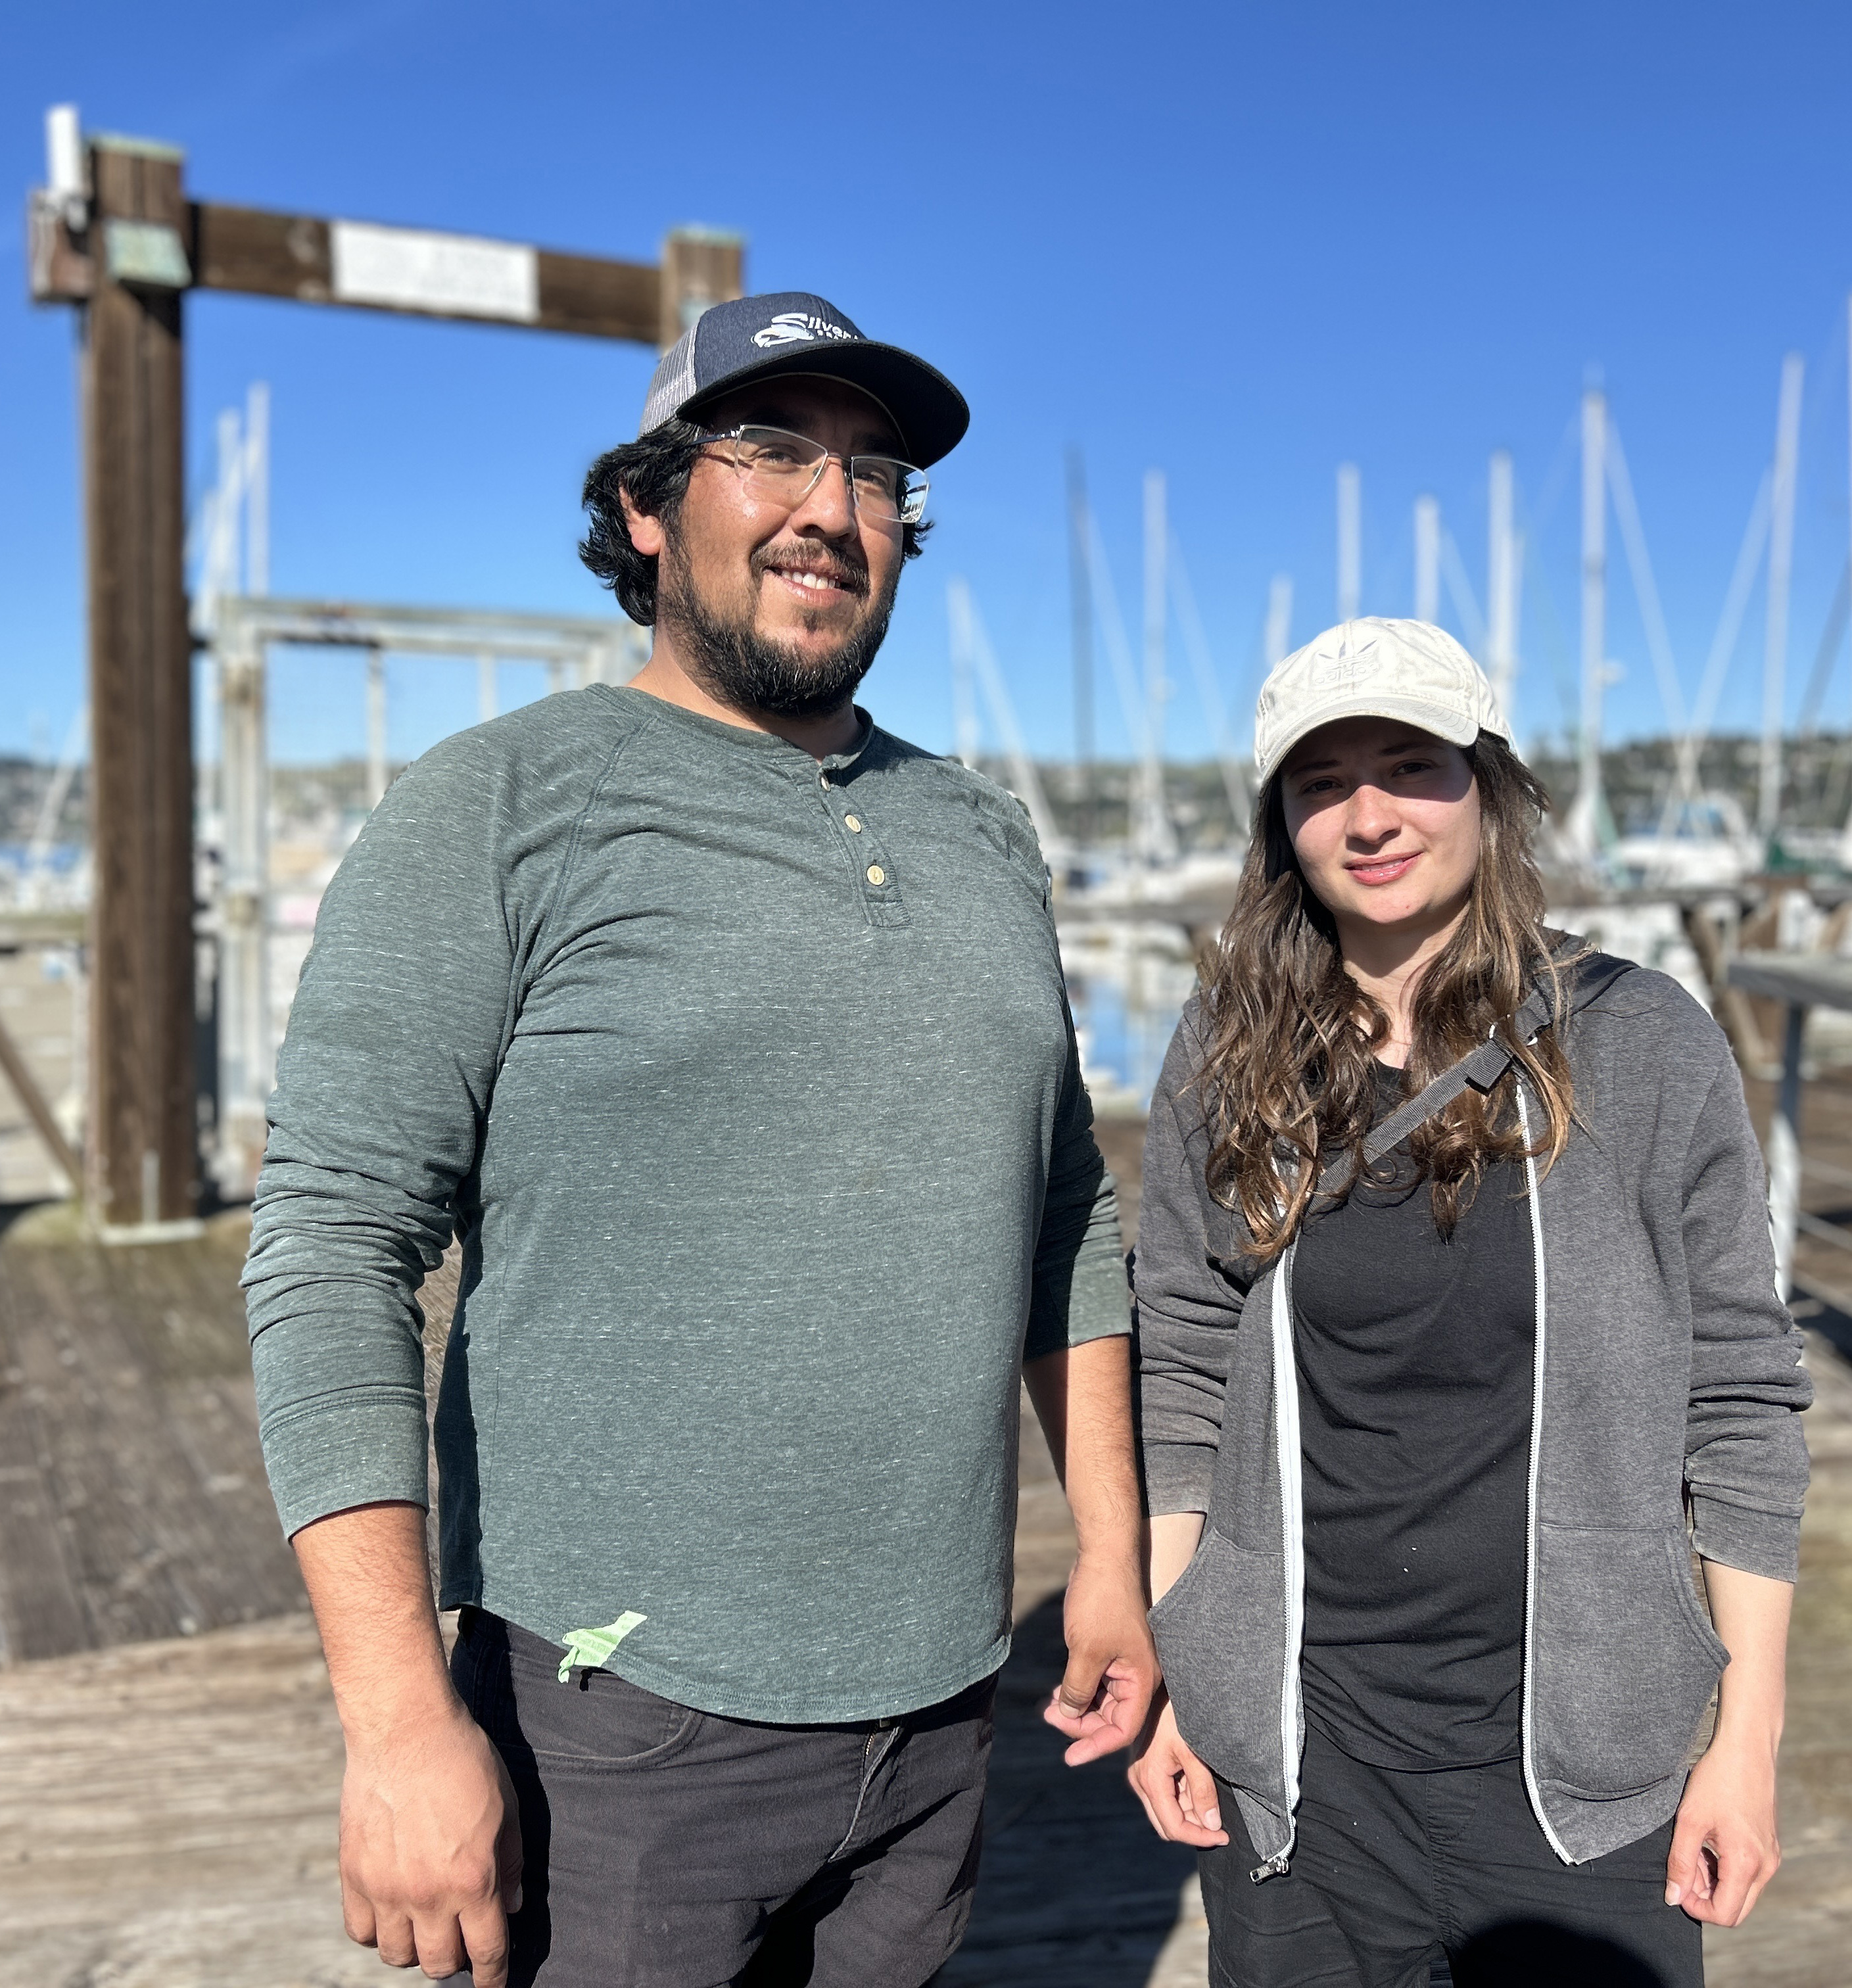 Two people are standing by a marina with boats and clear skies in the background. They are casually dressed and smiling.